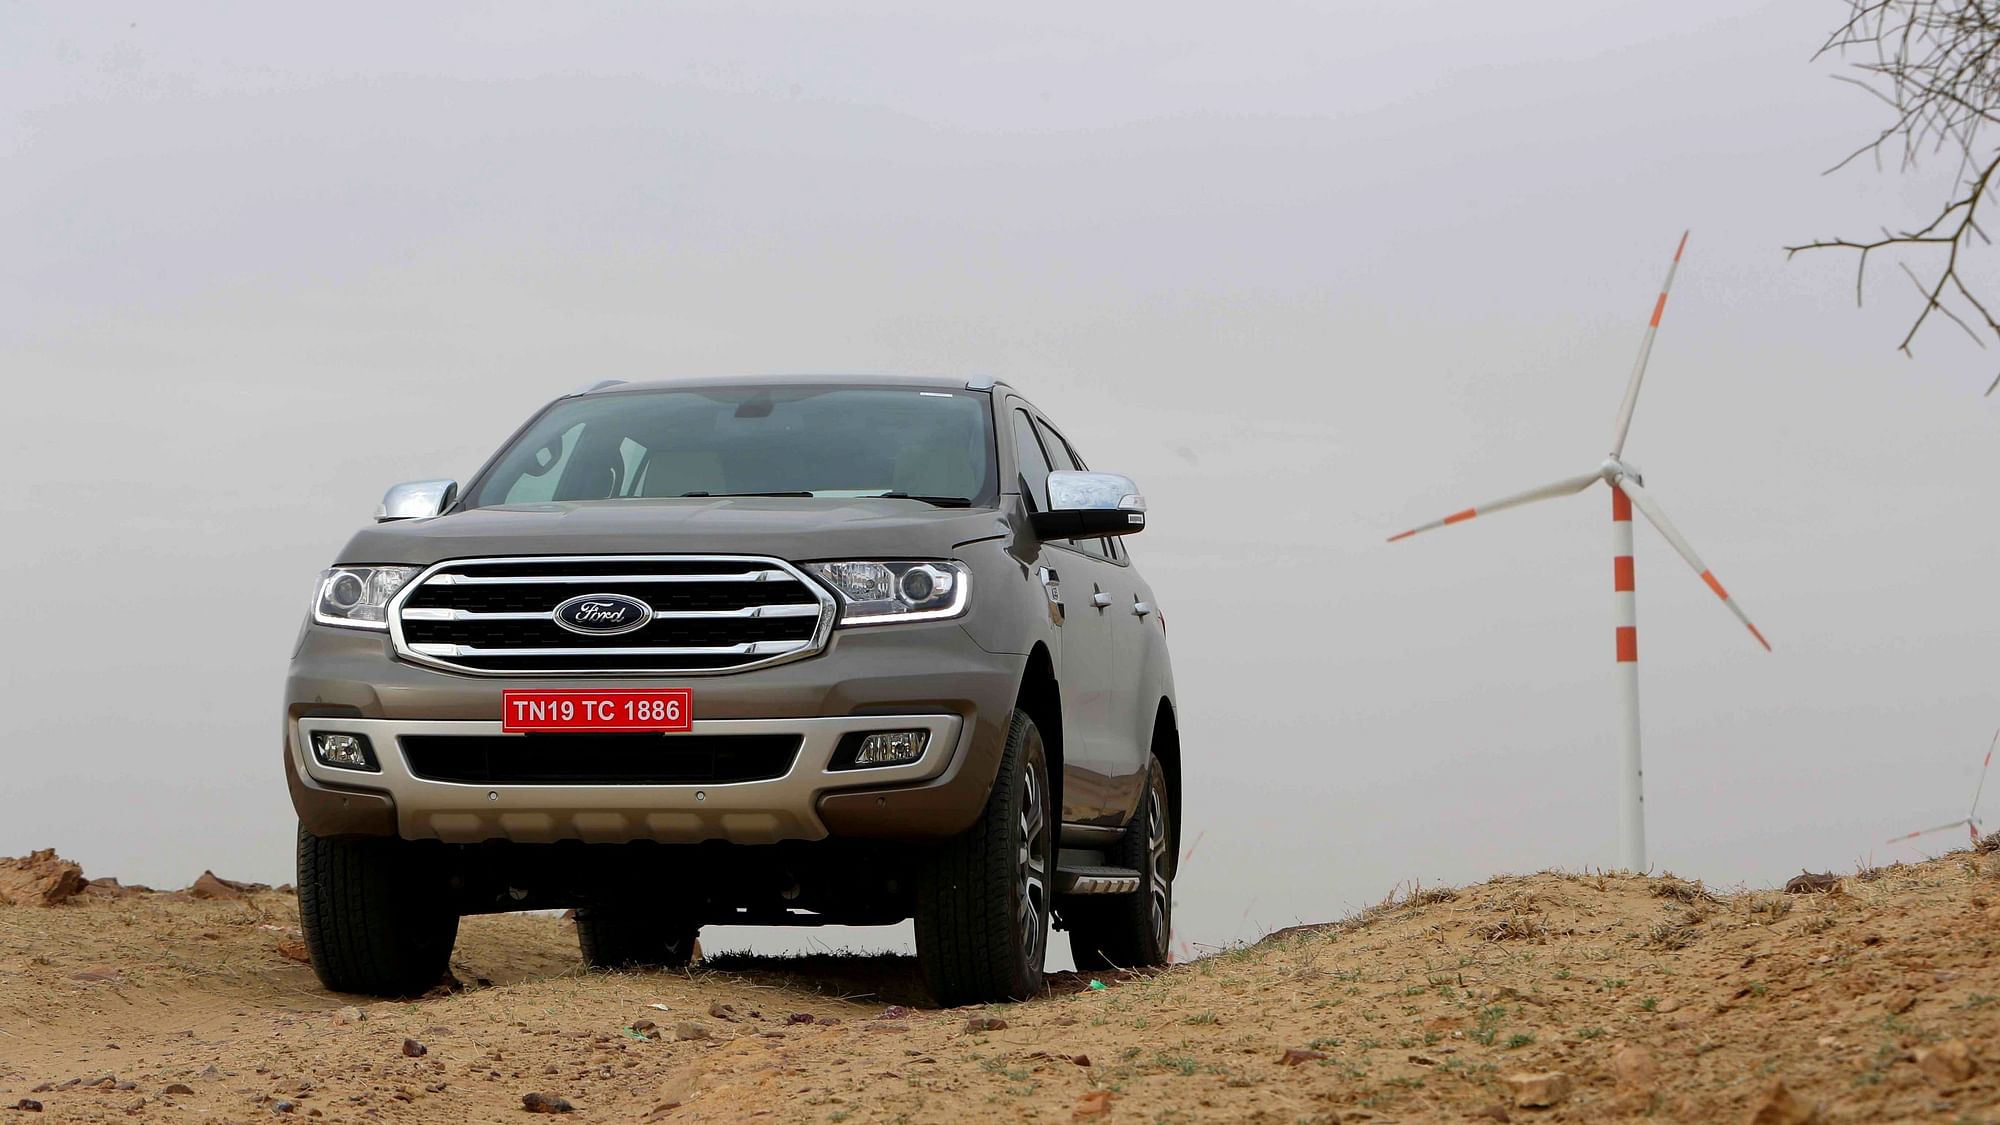 The 2019 Ford Endeavour gets minor cosmetic upgrades, but adds a few features.